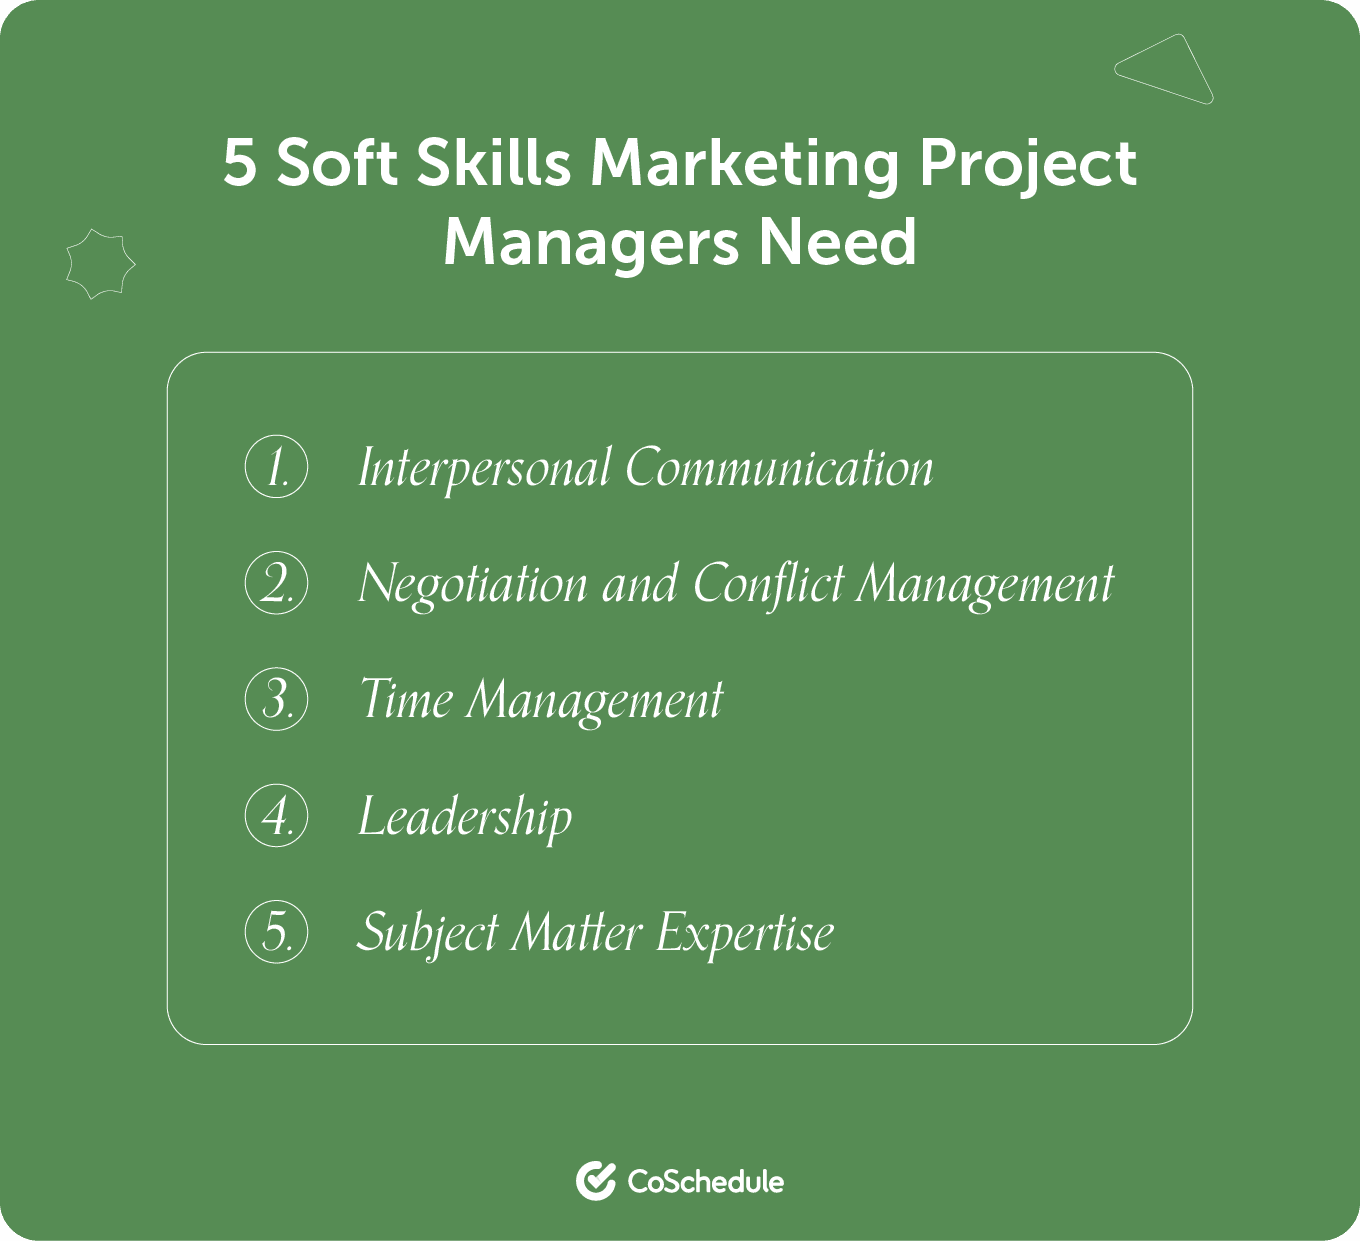 5 soft skills marketing project managers need to know